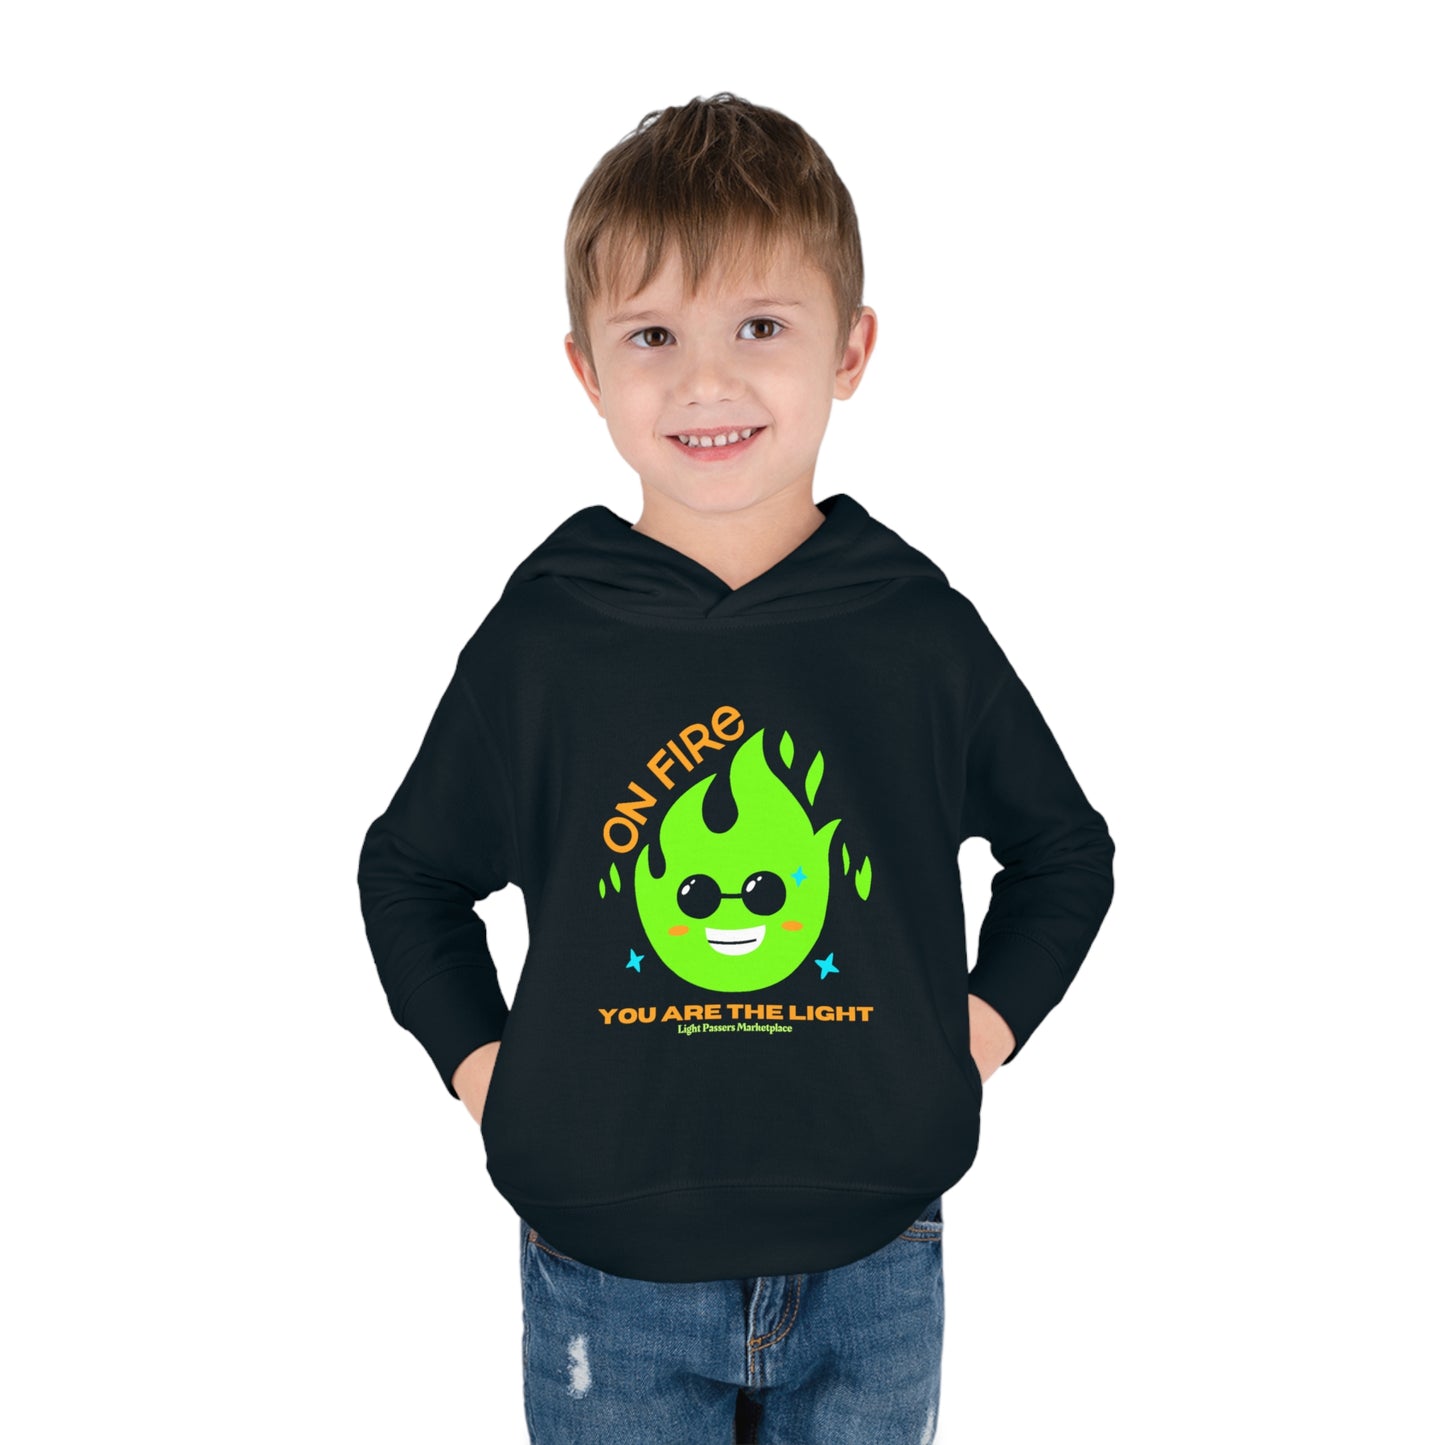 Light Passers Marketplace On Fire Toddler Pullover Hoodie Simple Messages, Mental Health